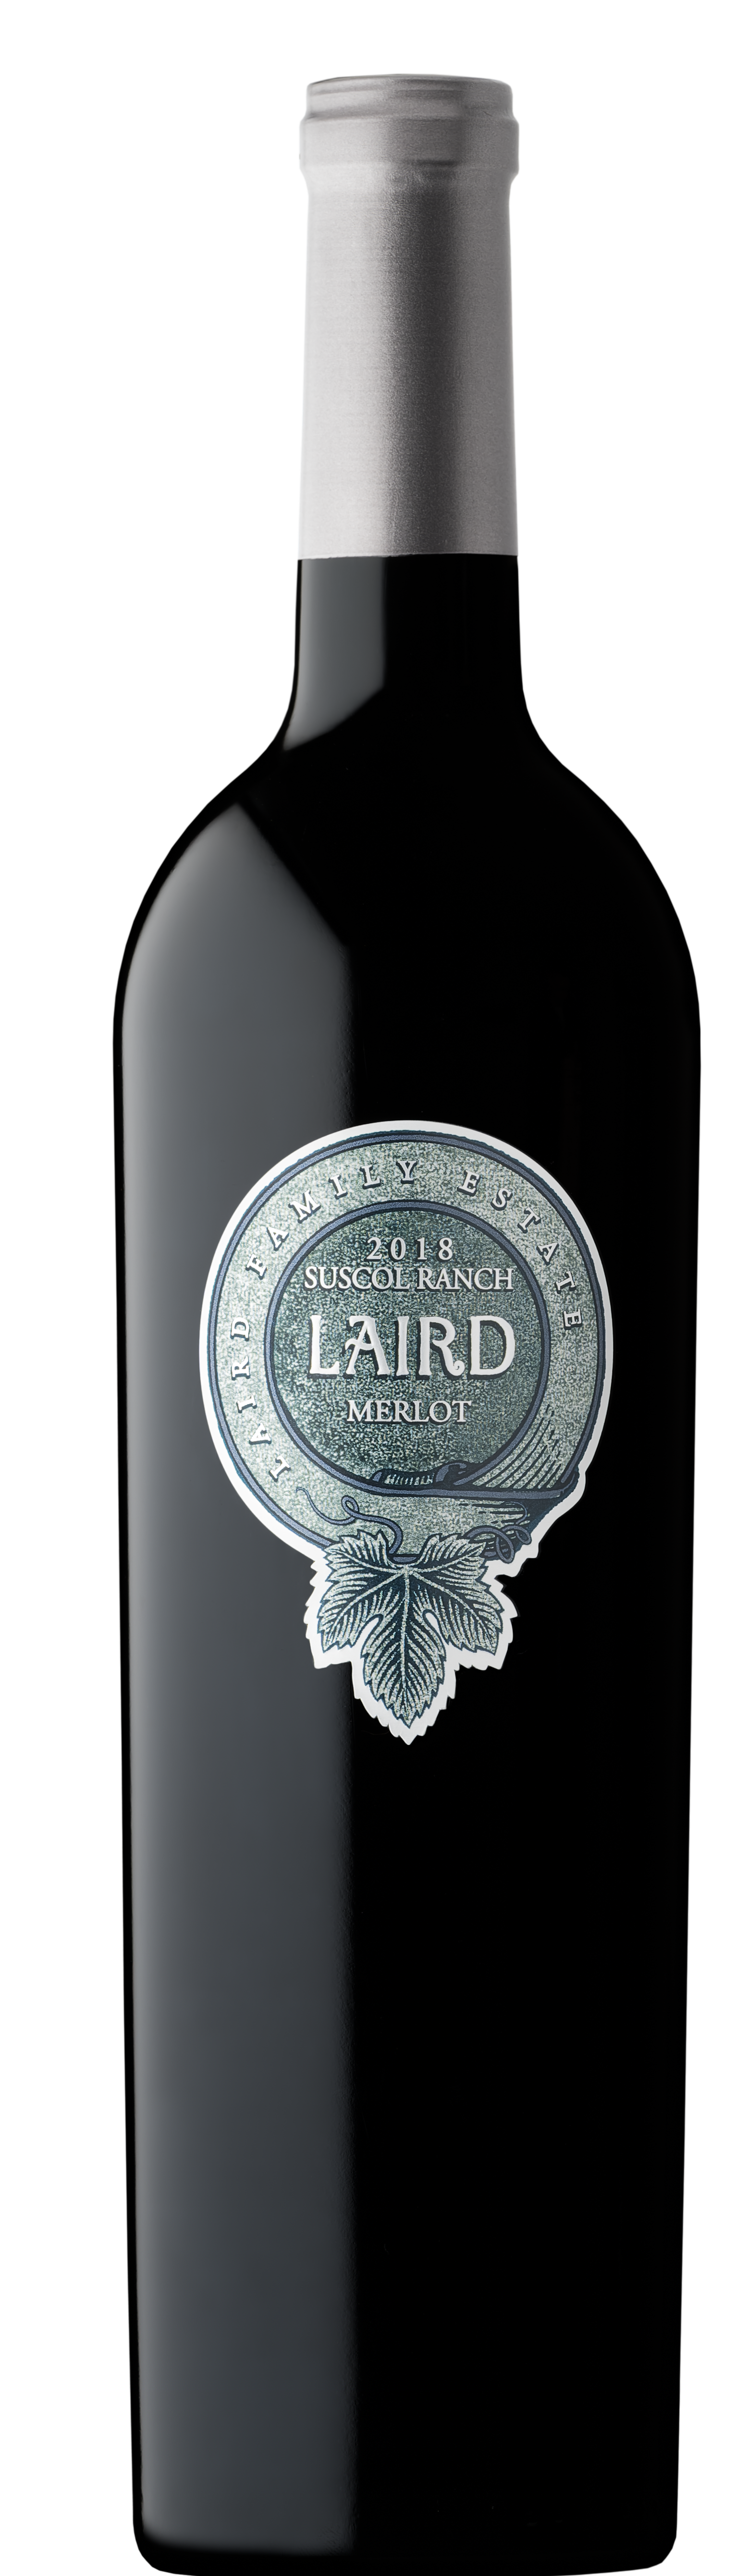 Product Image for 2018 Suscol Ranch Merlot